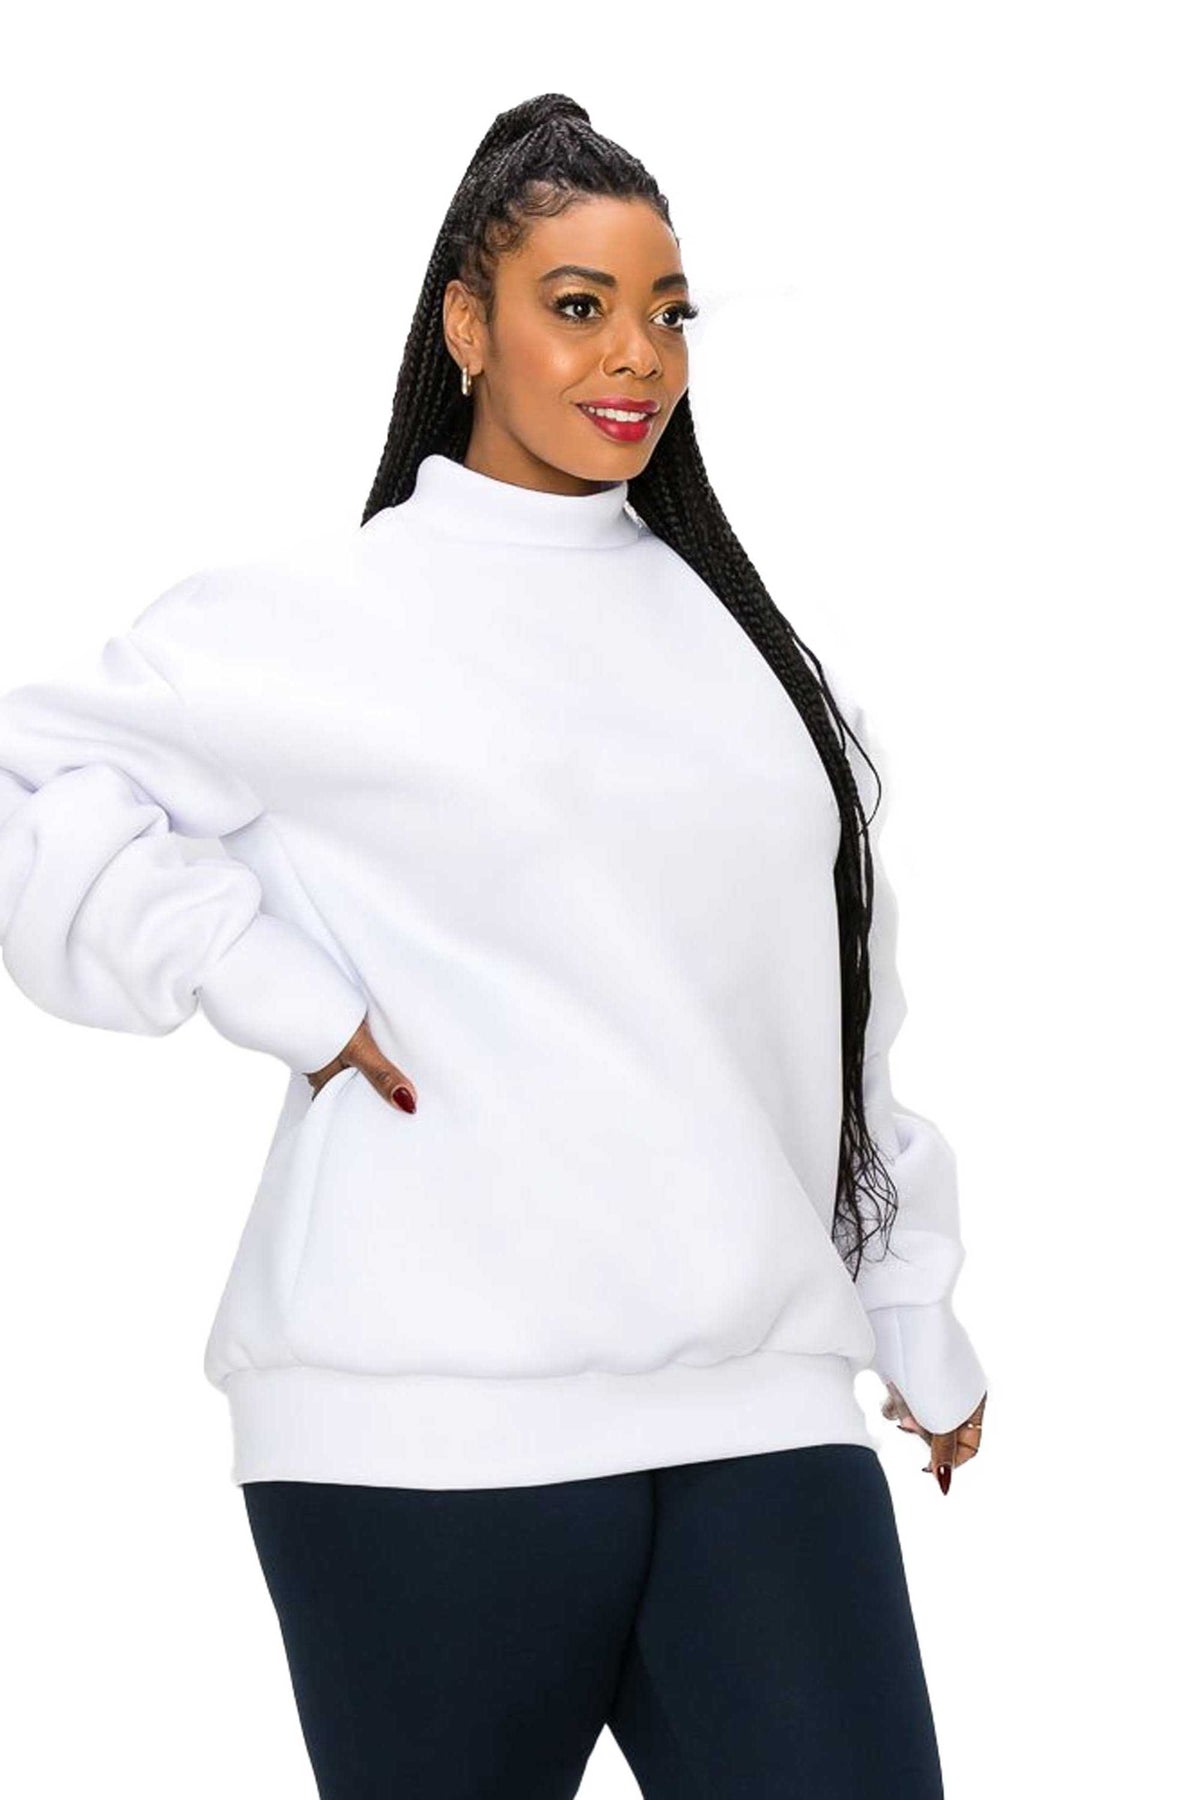 livd L I V D women's contemporary plus size boutique neoprene sweater sweatshirt with exaggerated sleeves in arctic white